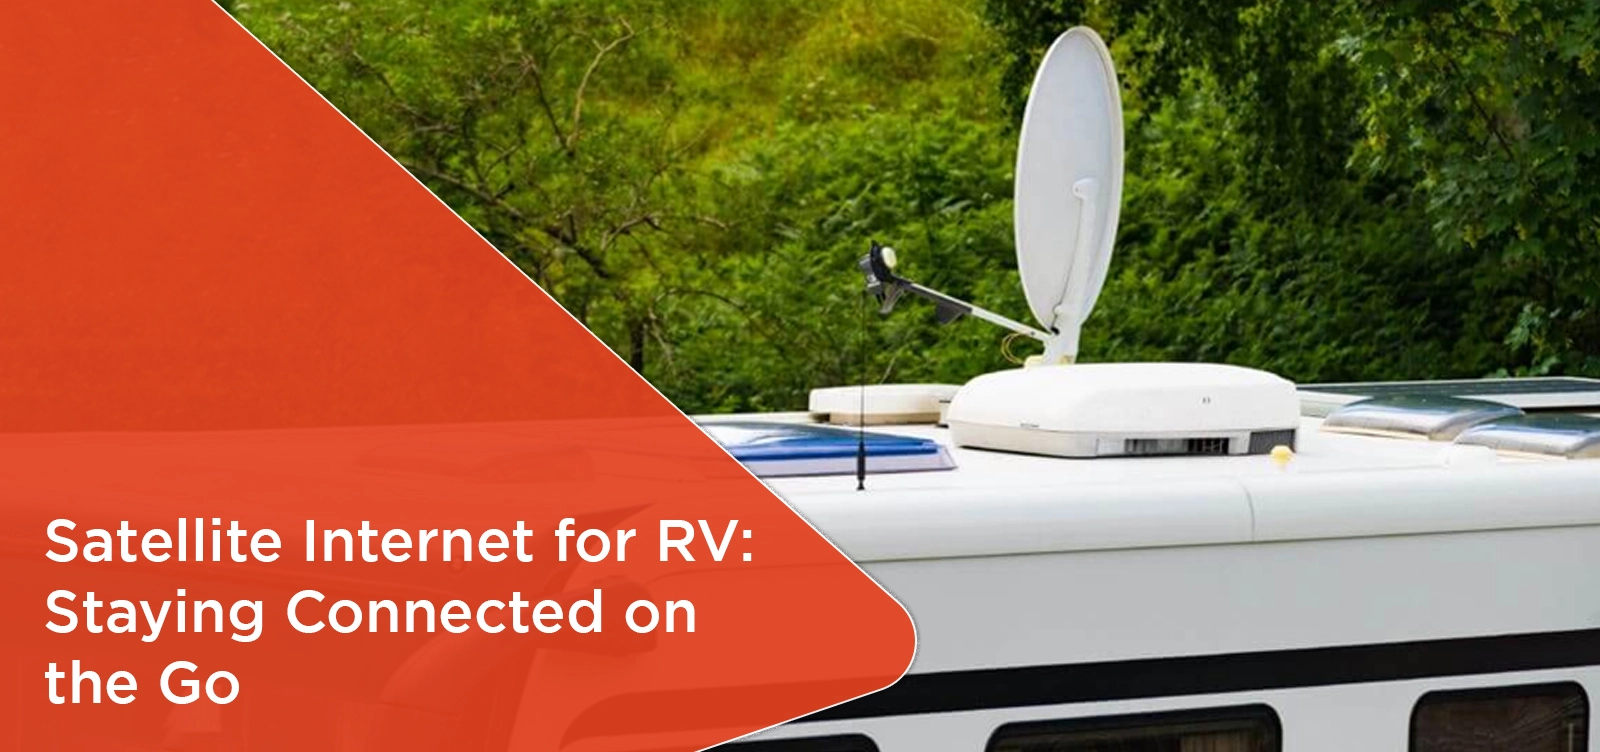 Satellite Internet for RV Staying Connected on the Go